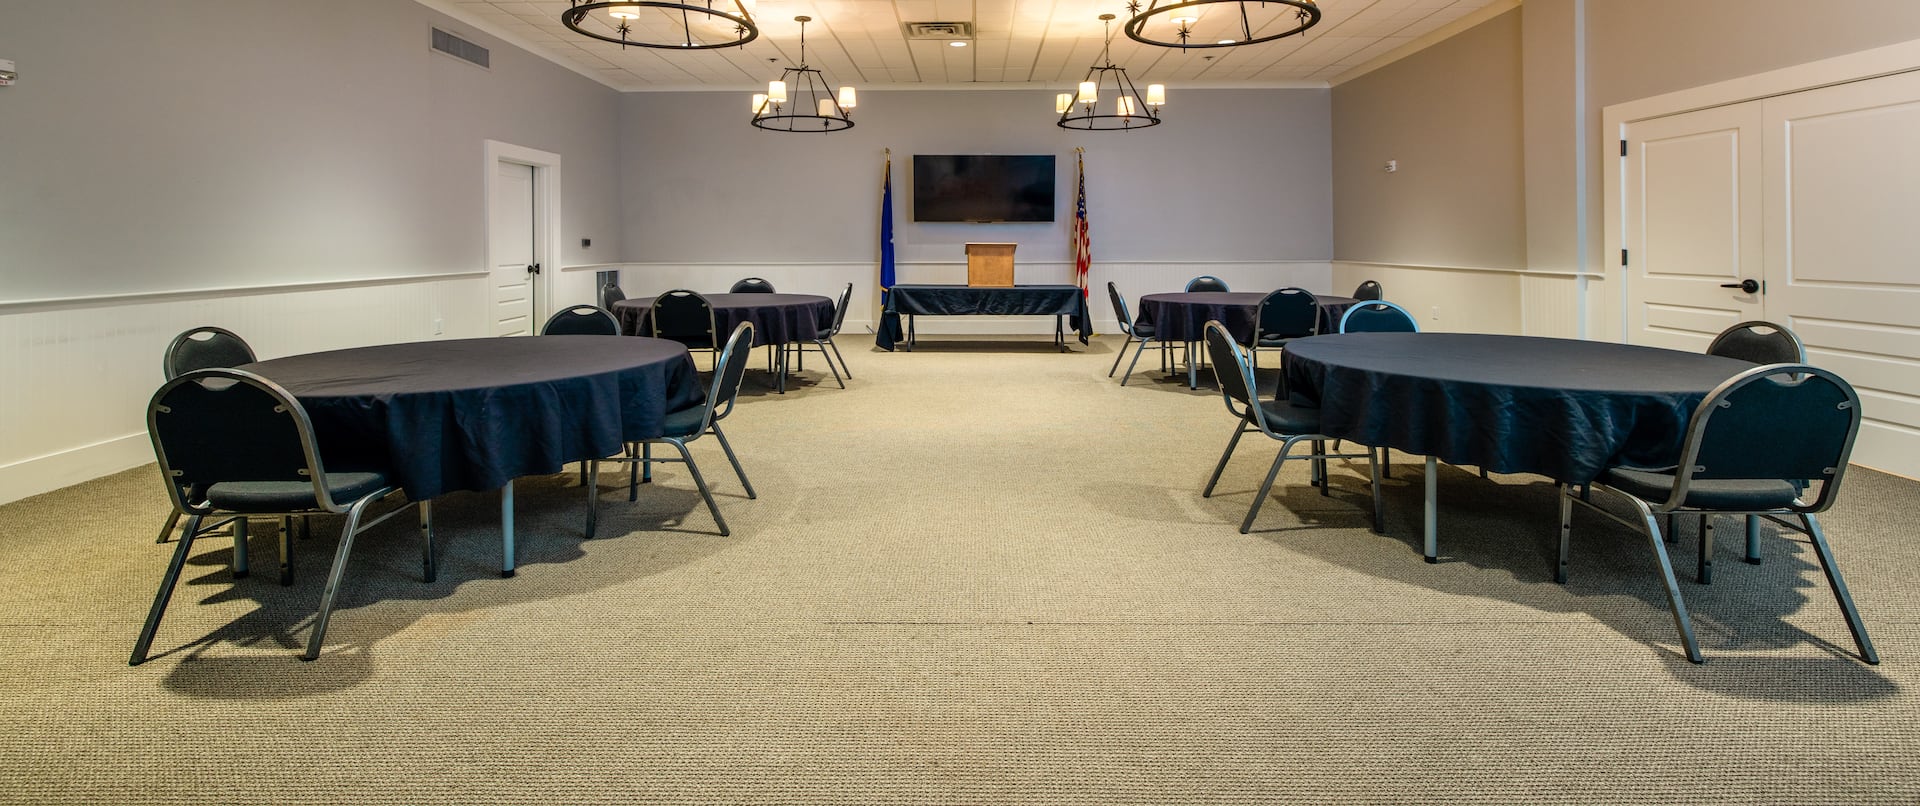 Community Room With Tables And Chairs